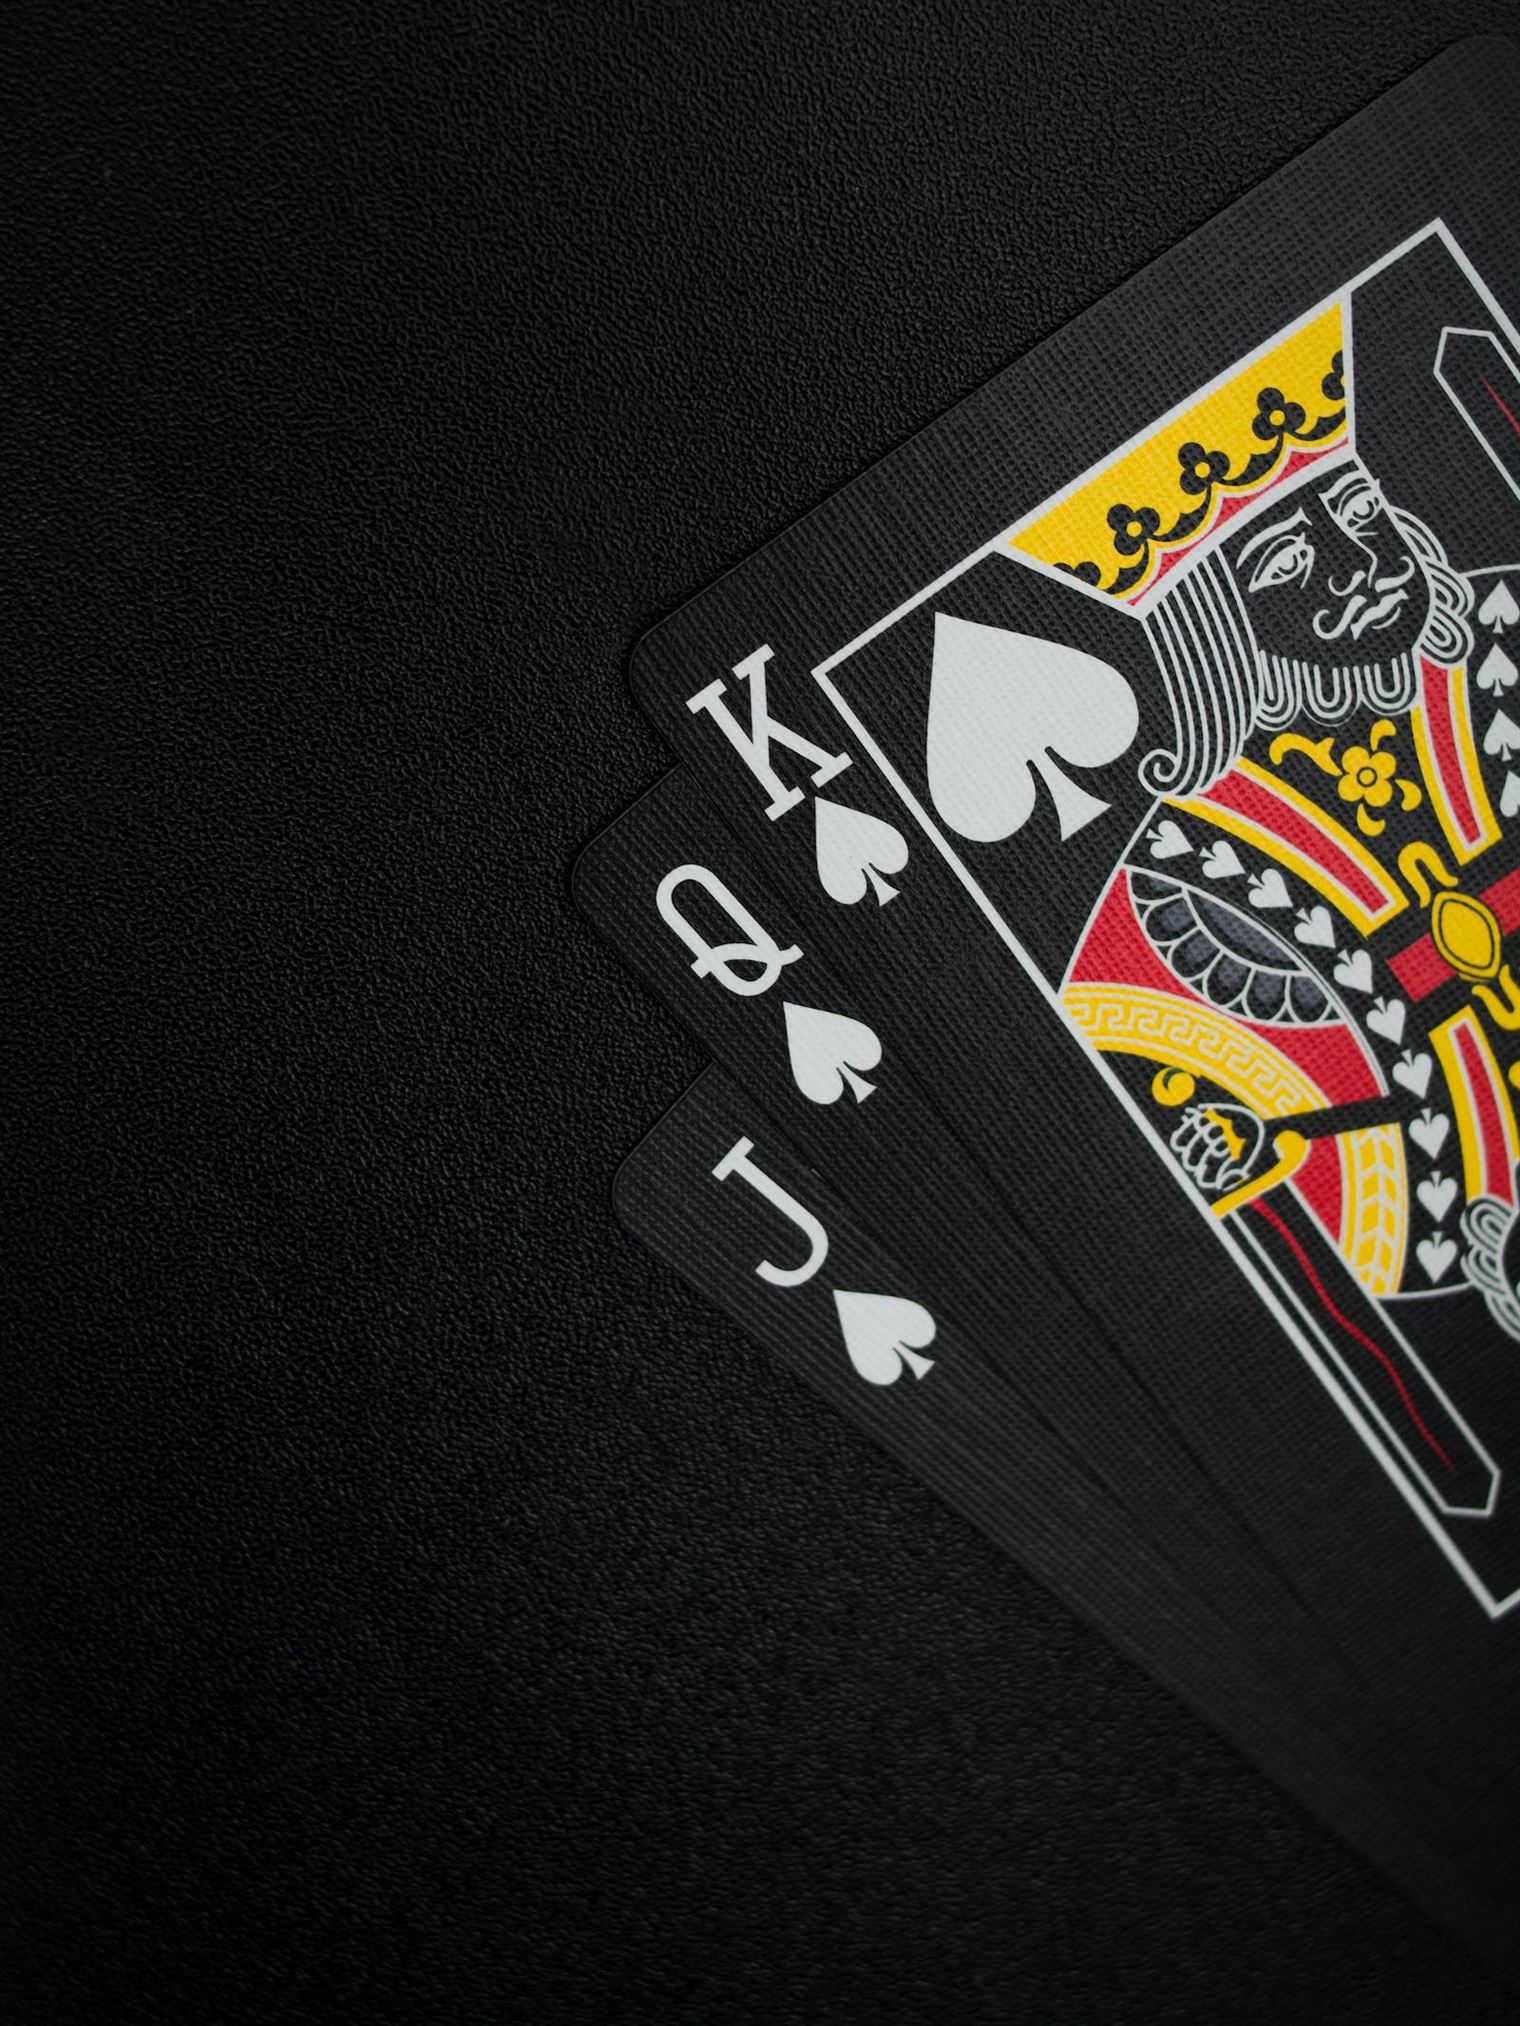 Elevate Your Skills: Conquering H.O.R.S.E Poker with Winning Strategies